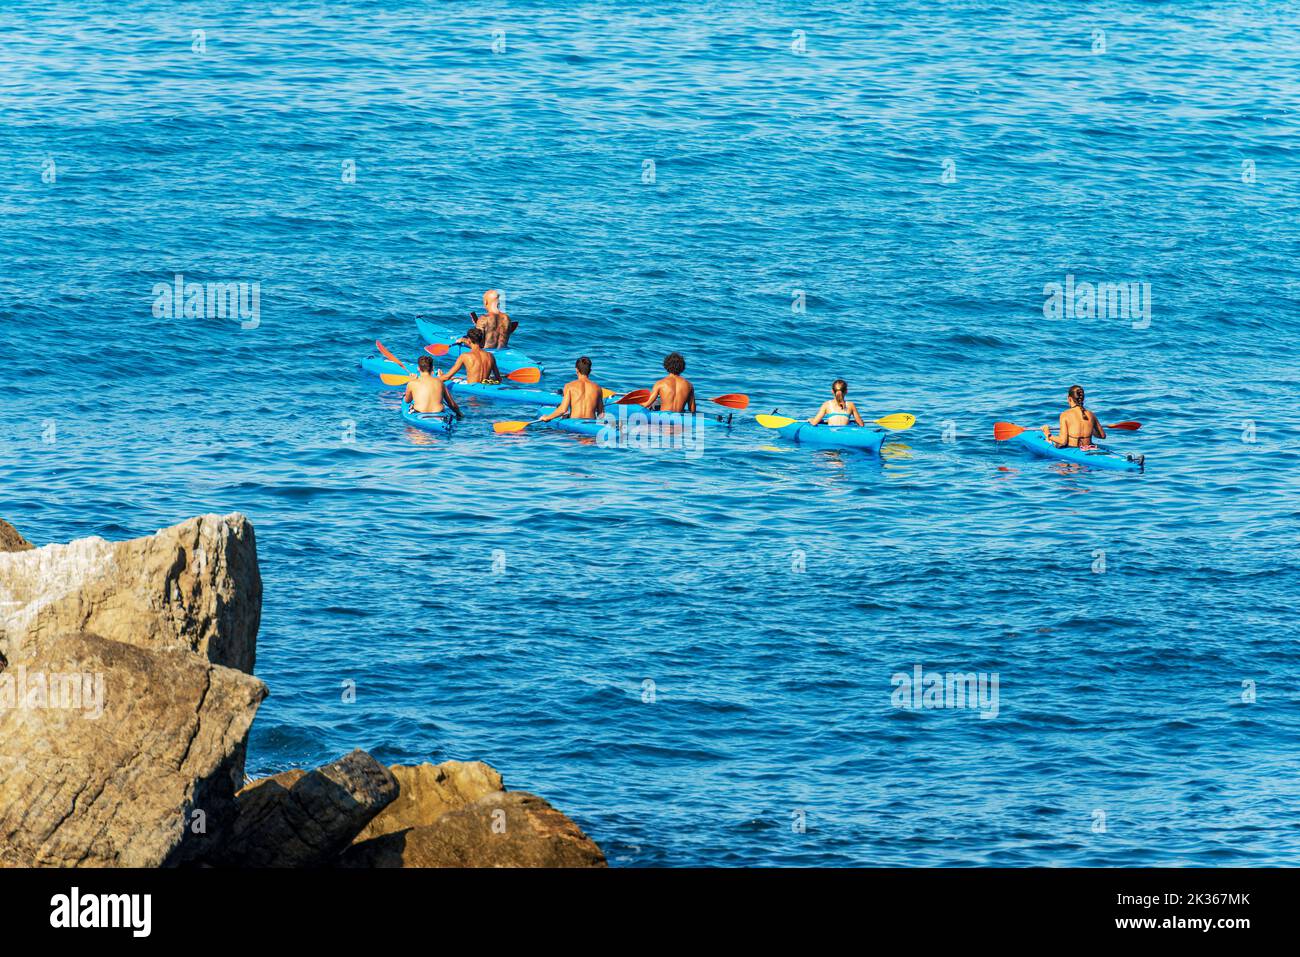 Large group of kayakers in the blue Mediterranean Sea, on a sunny summer day. Tellaro village, Gulf of La Spezia, Liguria, Italy, southern Europe. Stock Photo